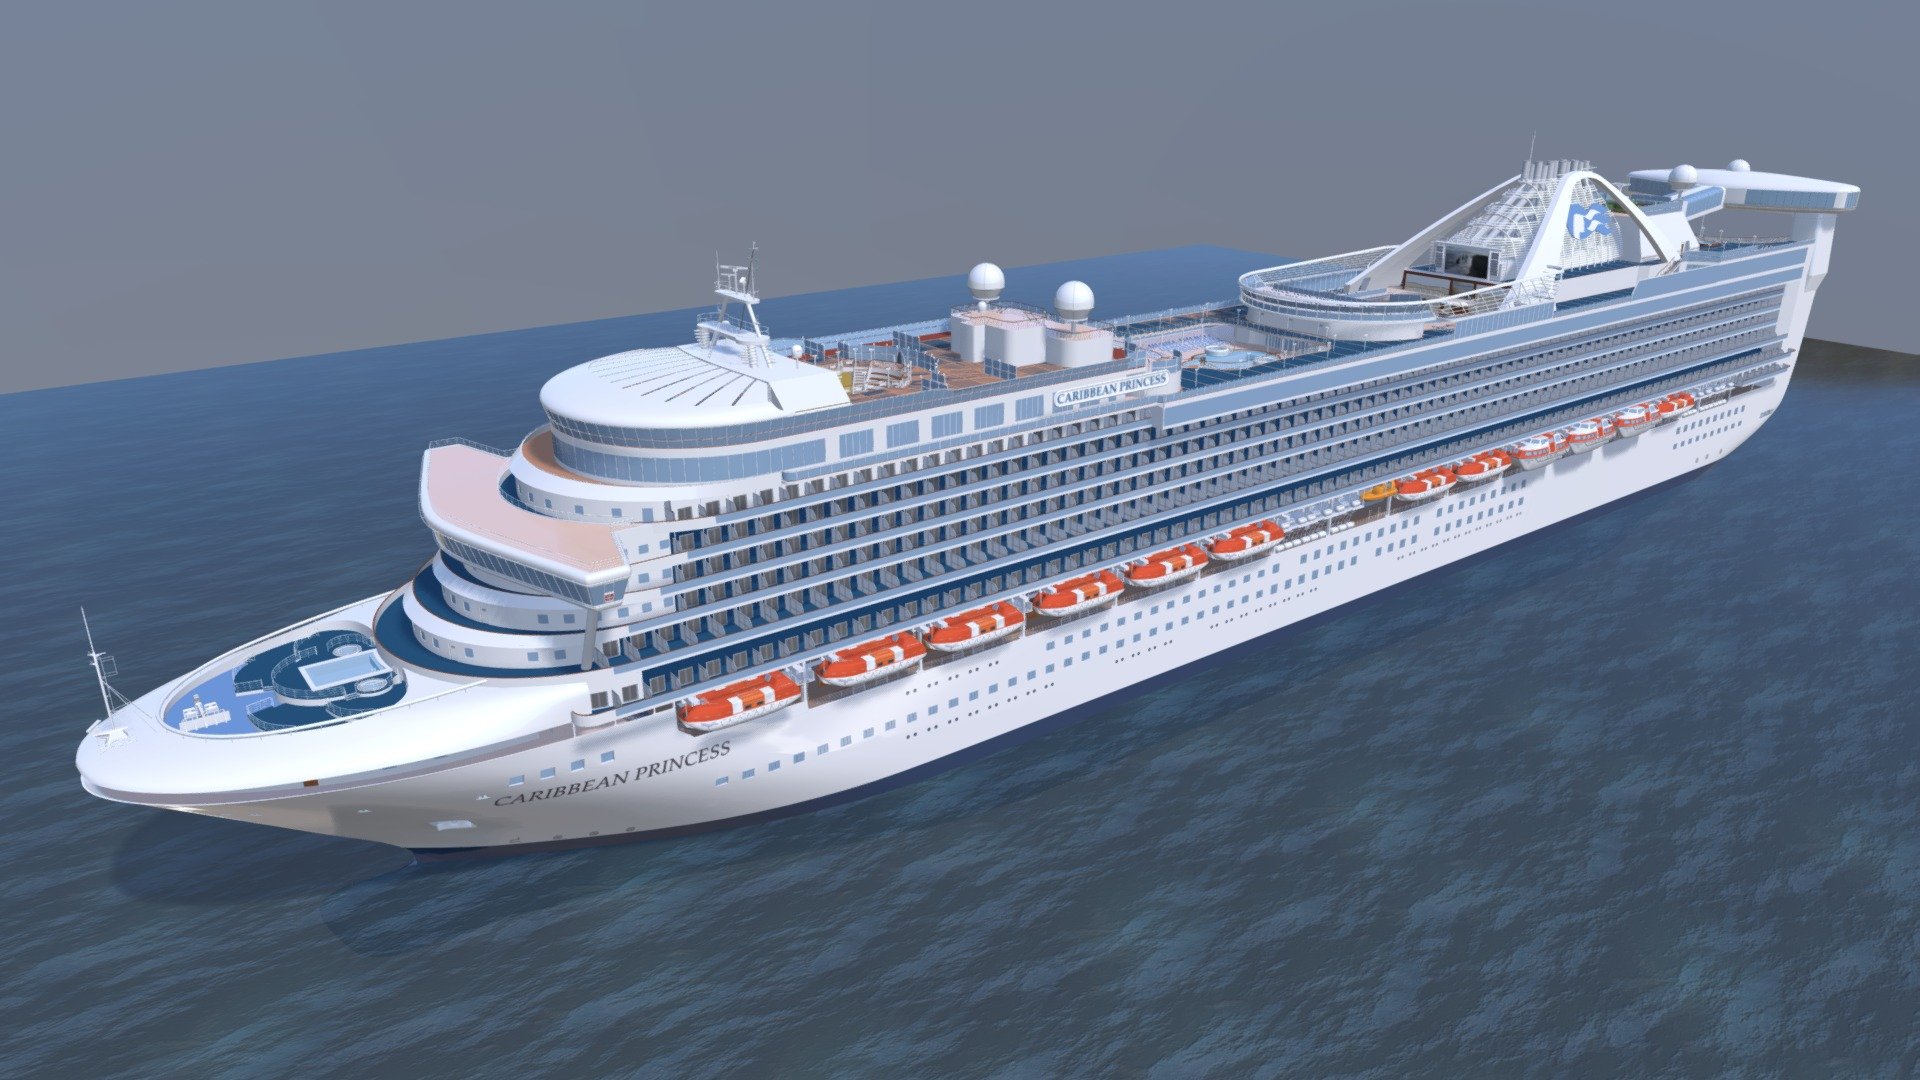 Caribbean Princess Cruise Ship.

Let's Create Interactive Experiences, that inspire.

We provide 3D Animation and Interactive Experiences.  From 3D Interactive Maps, Experiential Platforms to 3D Interactive Product Visualizations, we encourage customer engagement and brand awareness.

We are an Interactive Studio specializing in 3D, visual FX, animation and software development. A unique combination that perfectly allows us to create stunning interactives. With 20+ years of experience in the entertainment industry, rooted in video games and feature films, Arion Digital bridges the divide between art and technology.

Email: hello@ariondigital.com
phone number: +1 661.388.4504

website: www.ariondigital.com
blog: www.ariondigital.com/3d-visual-fx-interactive-maps-blog
facebook: www.facebook.com/ArionDigital3D
linkedin: www.linkedin.com/company/ariondigital
twitter: twitter.com/ArionDigital3D
instagram: www.instagram.com/ariondigital
sketchfab: www.sketchfab.com/andrewswihart - Caribbean Princess Cruise Ship - 3D model by Arion Digital (@andrewswihart) 3d model